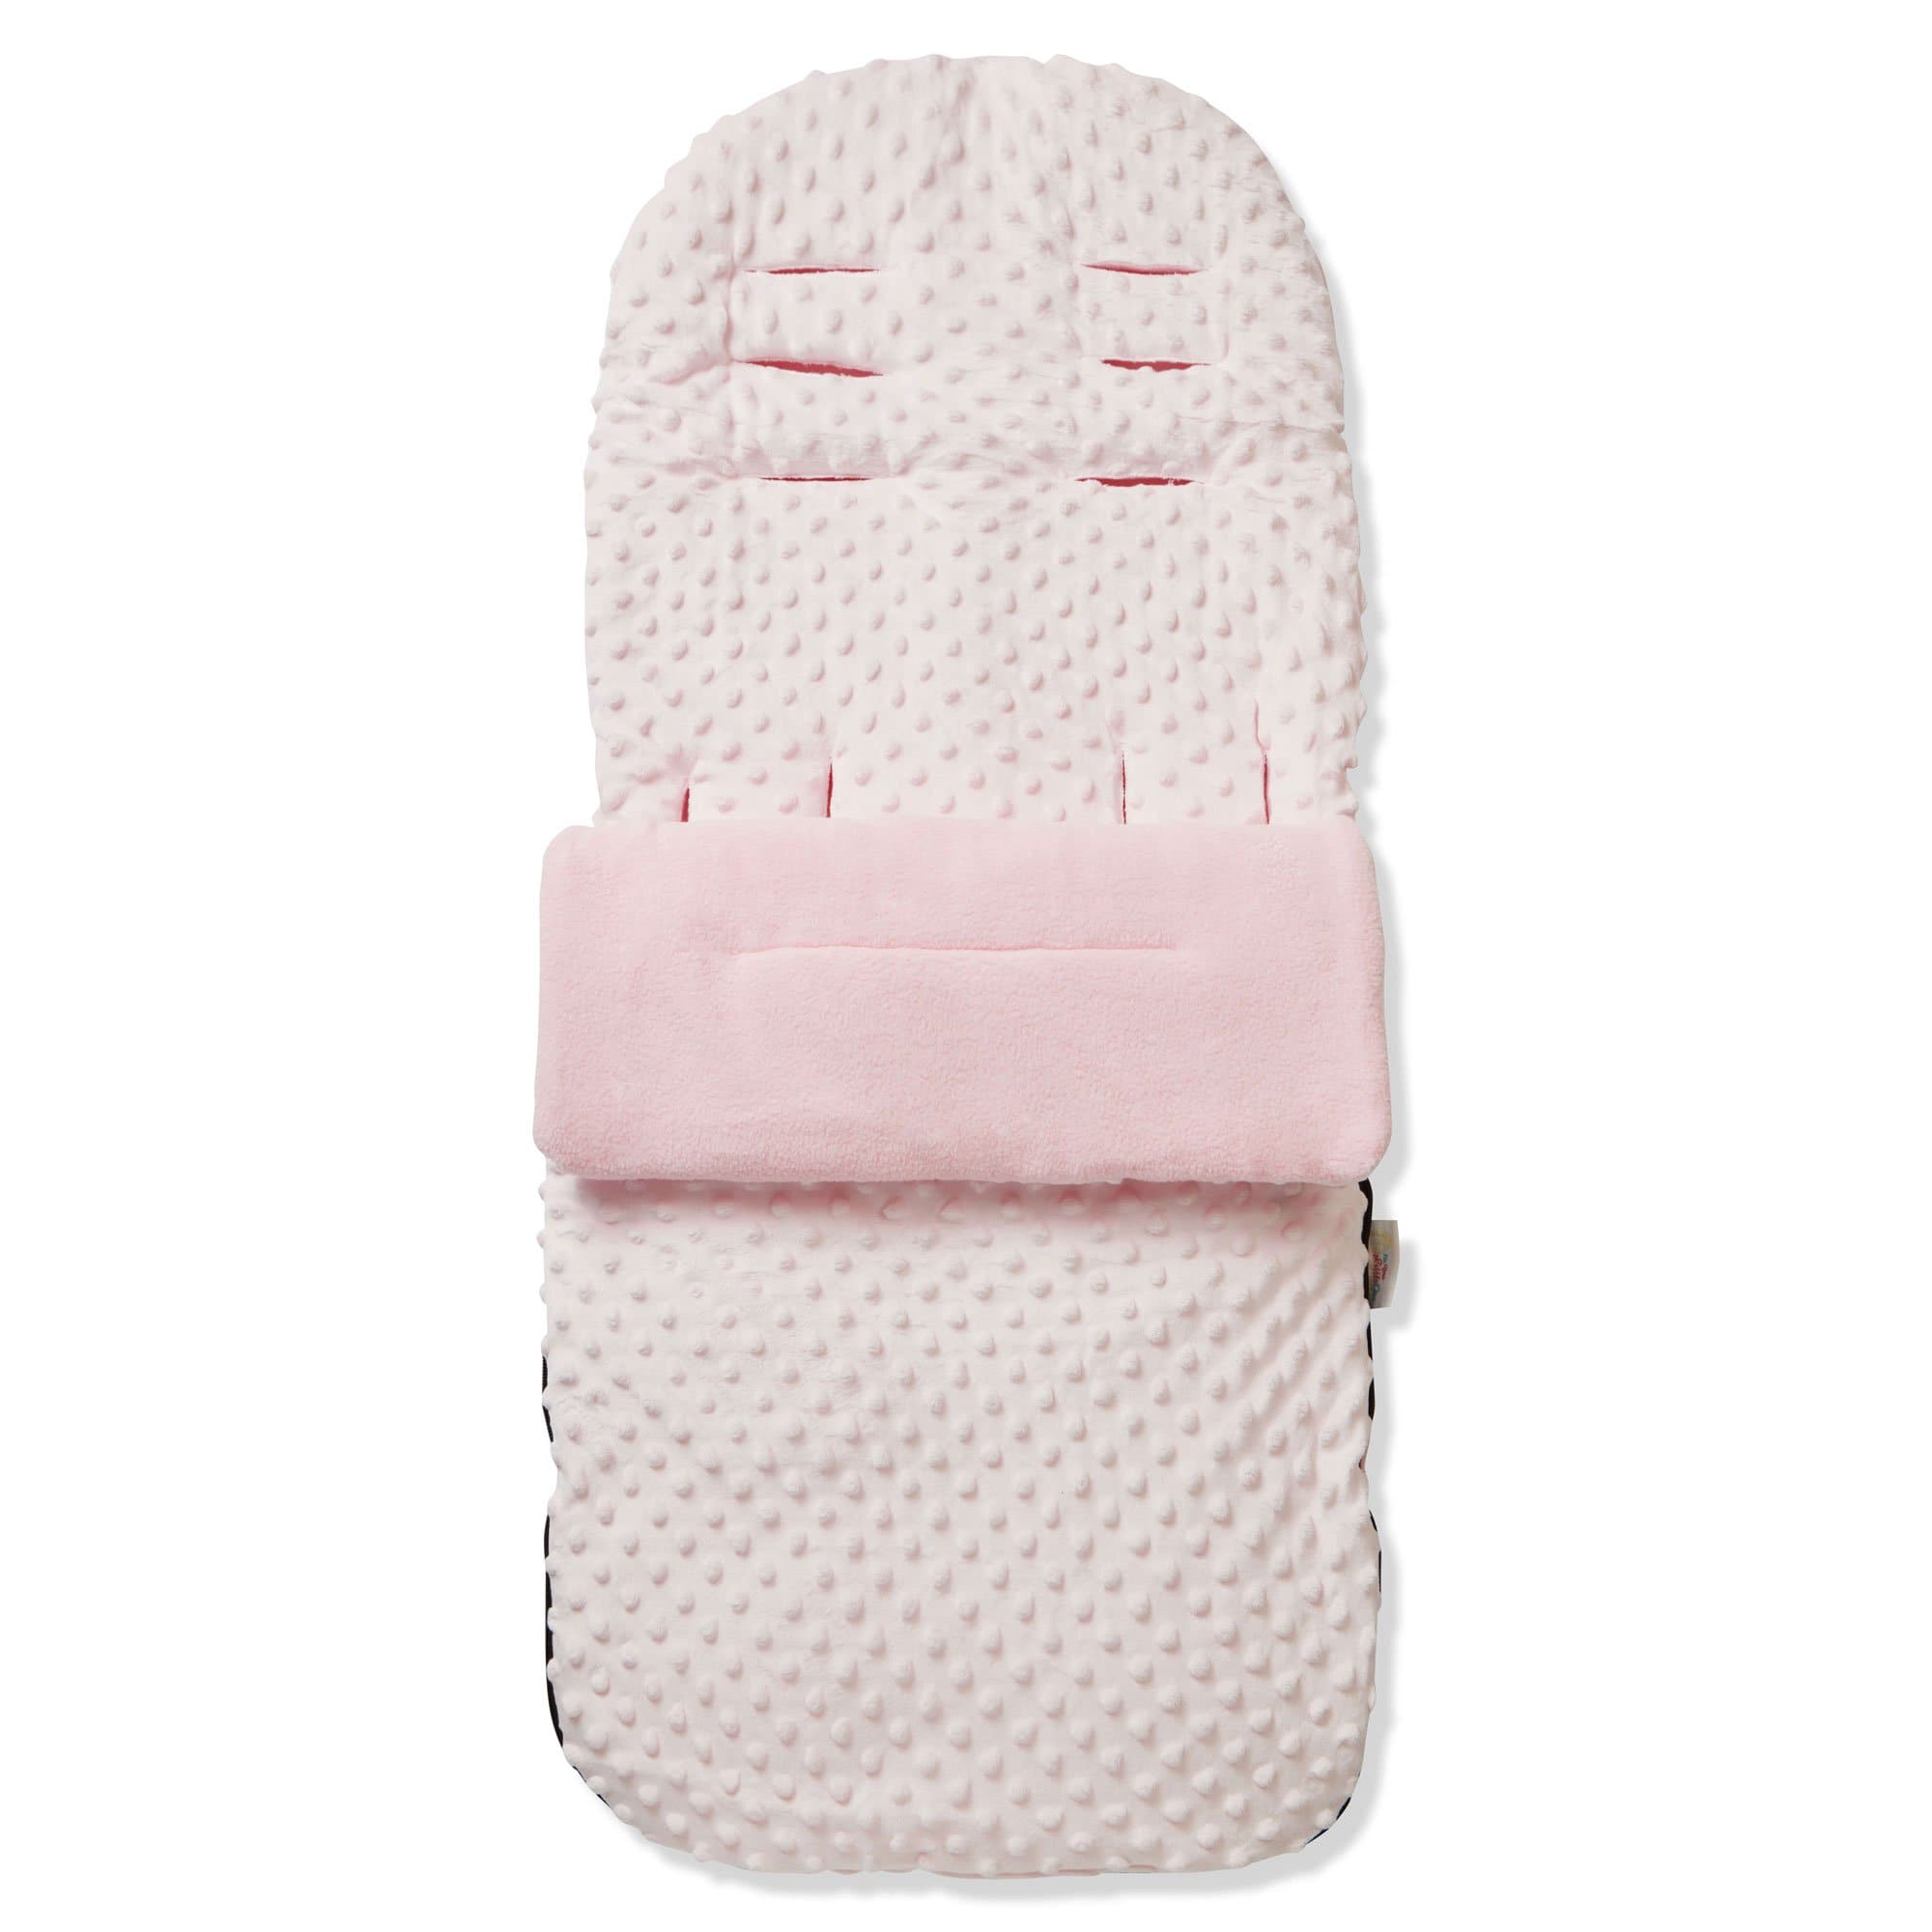 Dimple Footmuff / Cosy Toes Compatible with Norton - For Your Little One